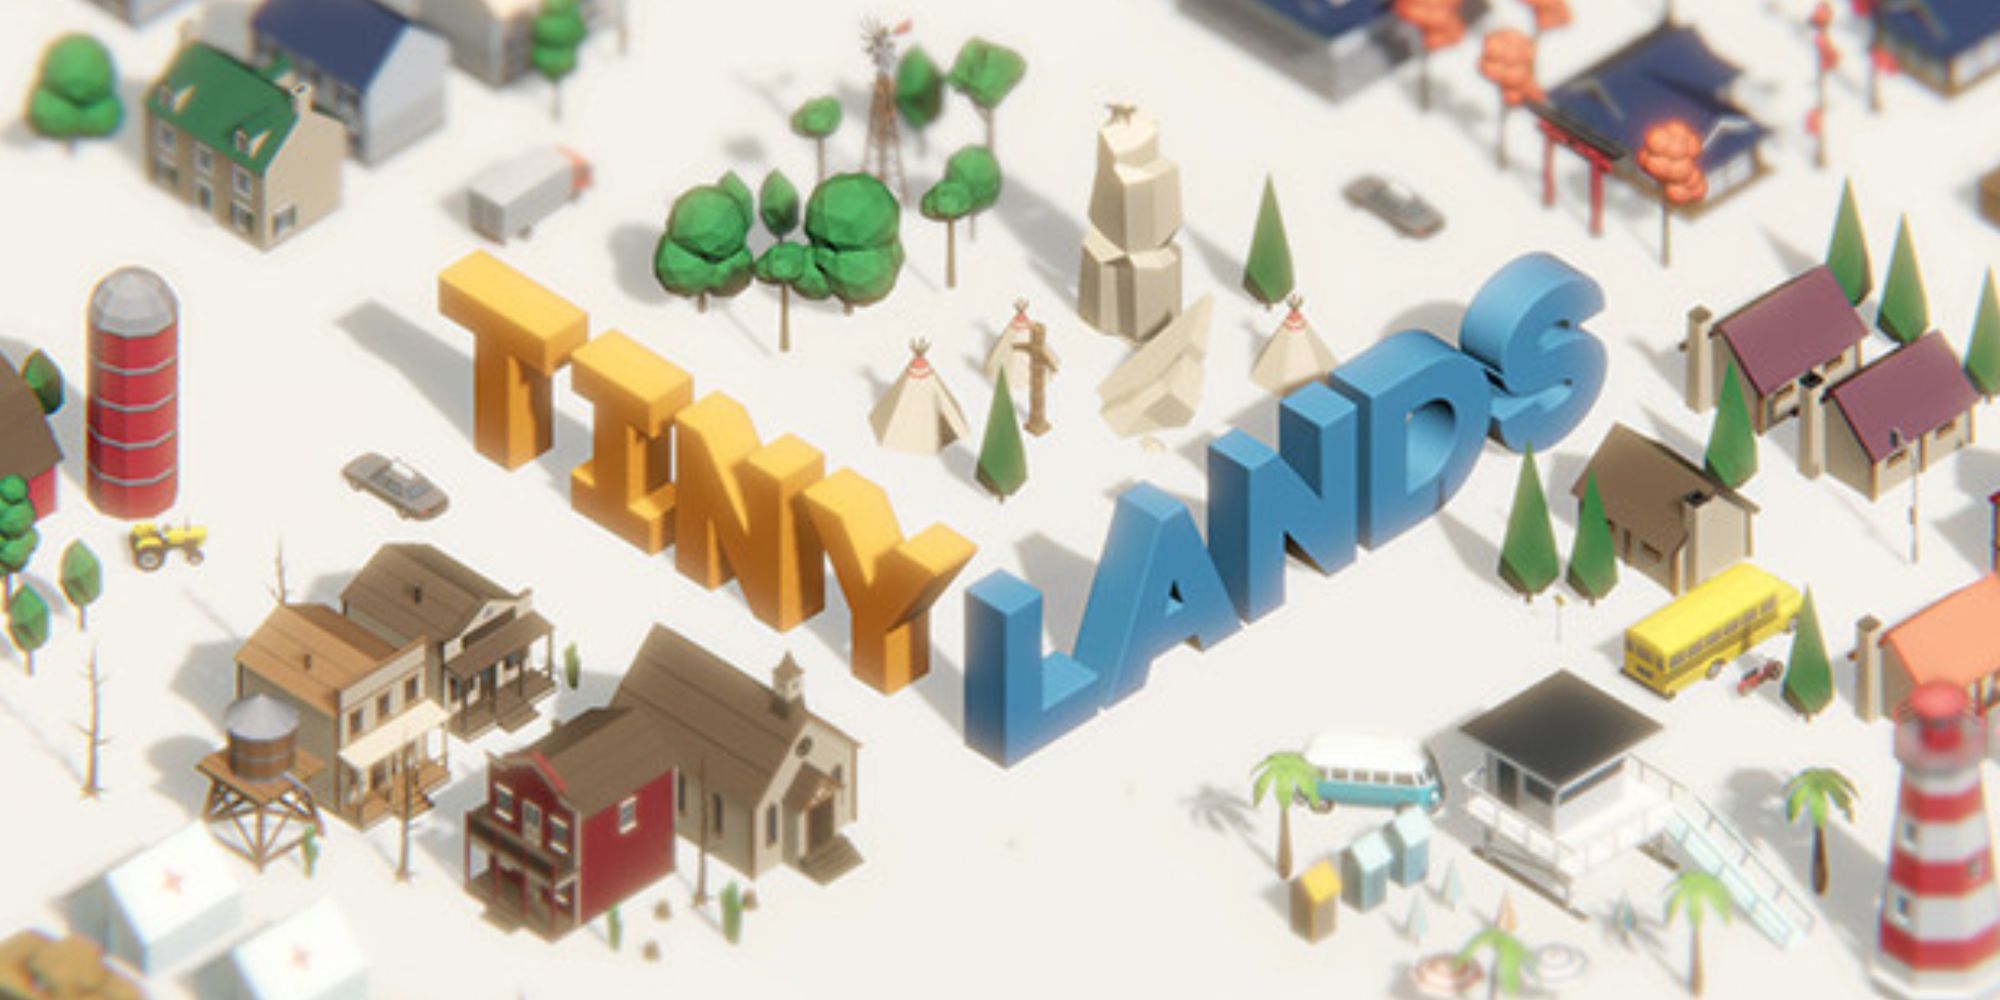 Tiny Lands Cover Image Text Set Against 3D Models of Various Styles of Homes